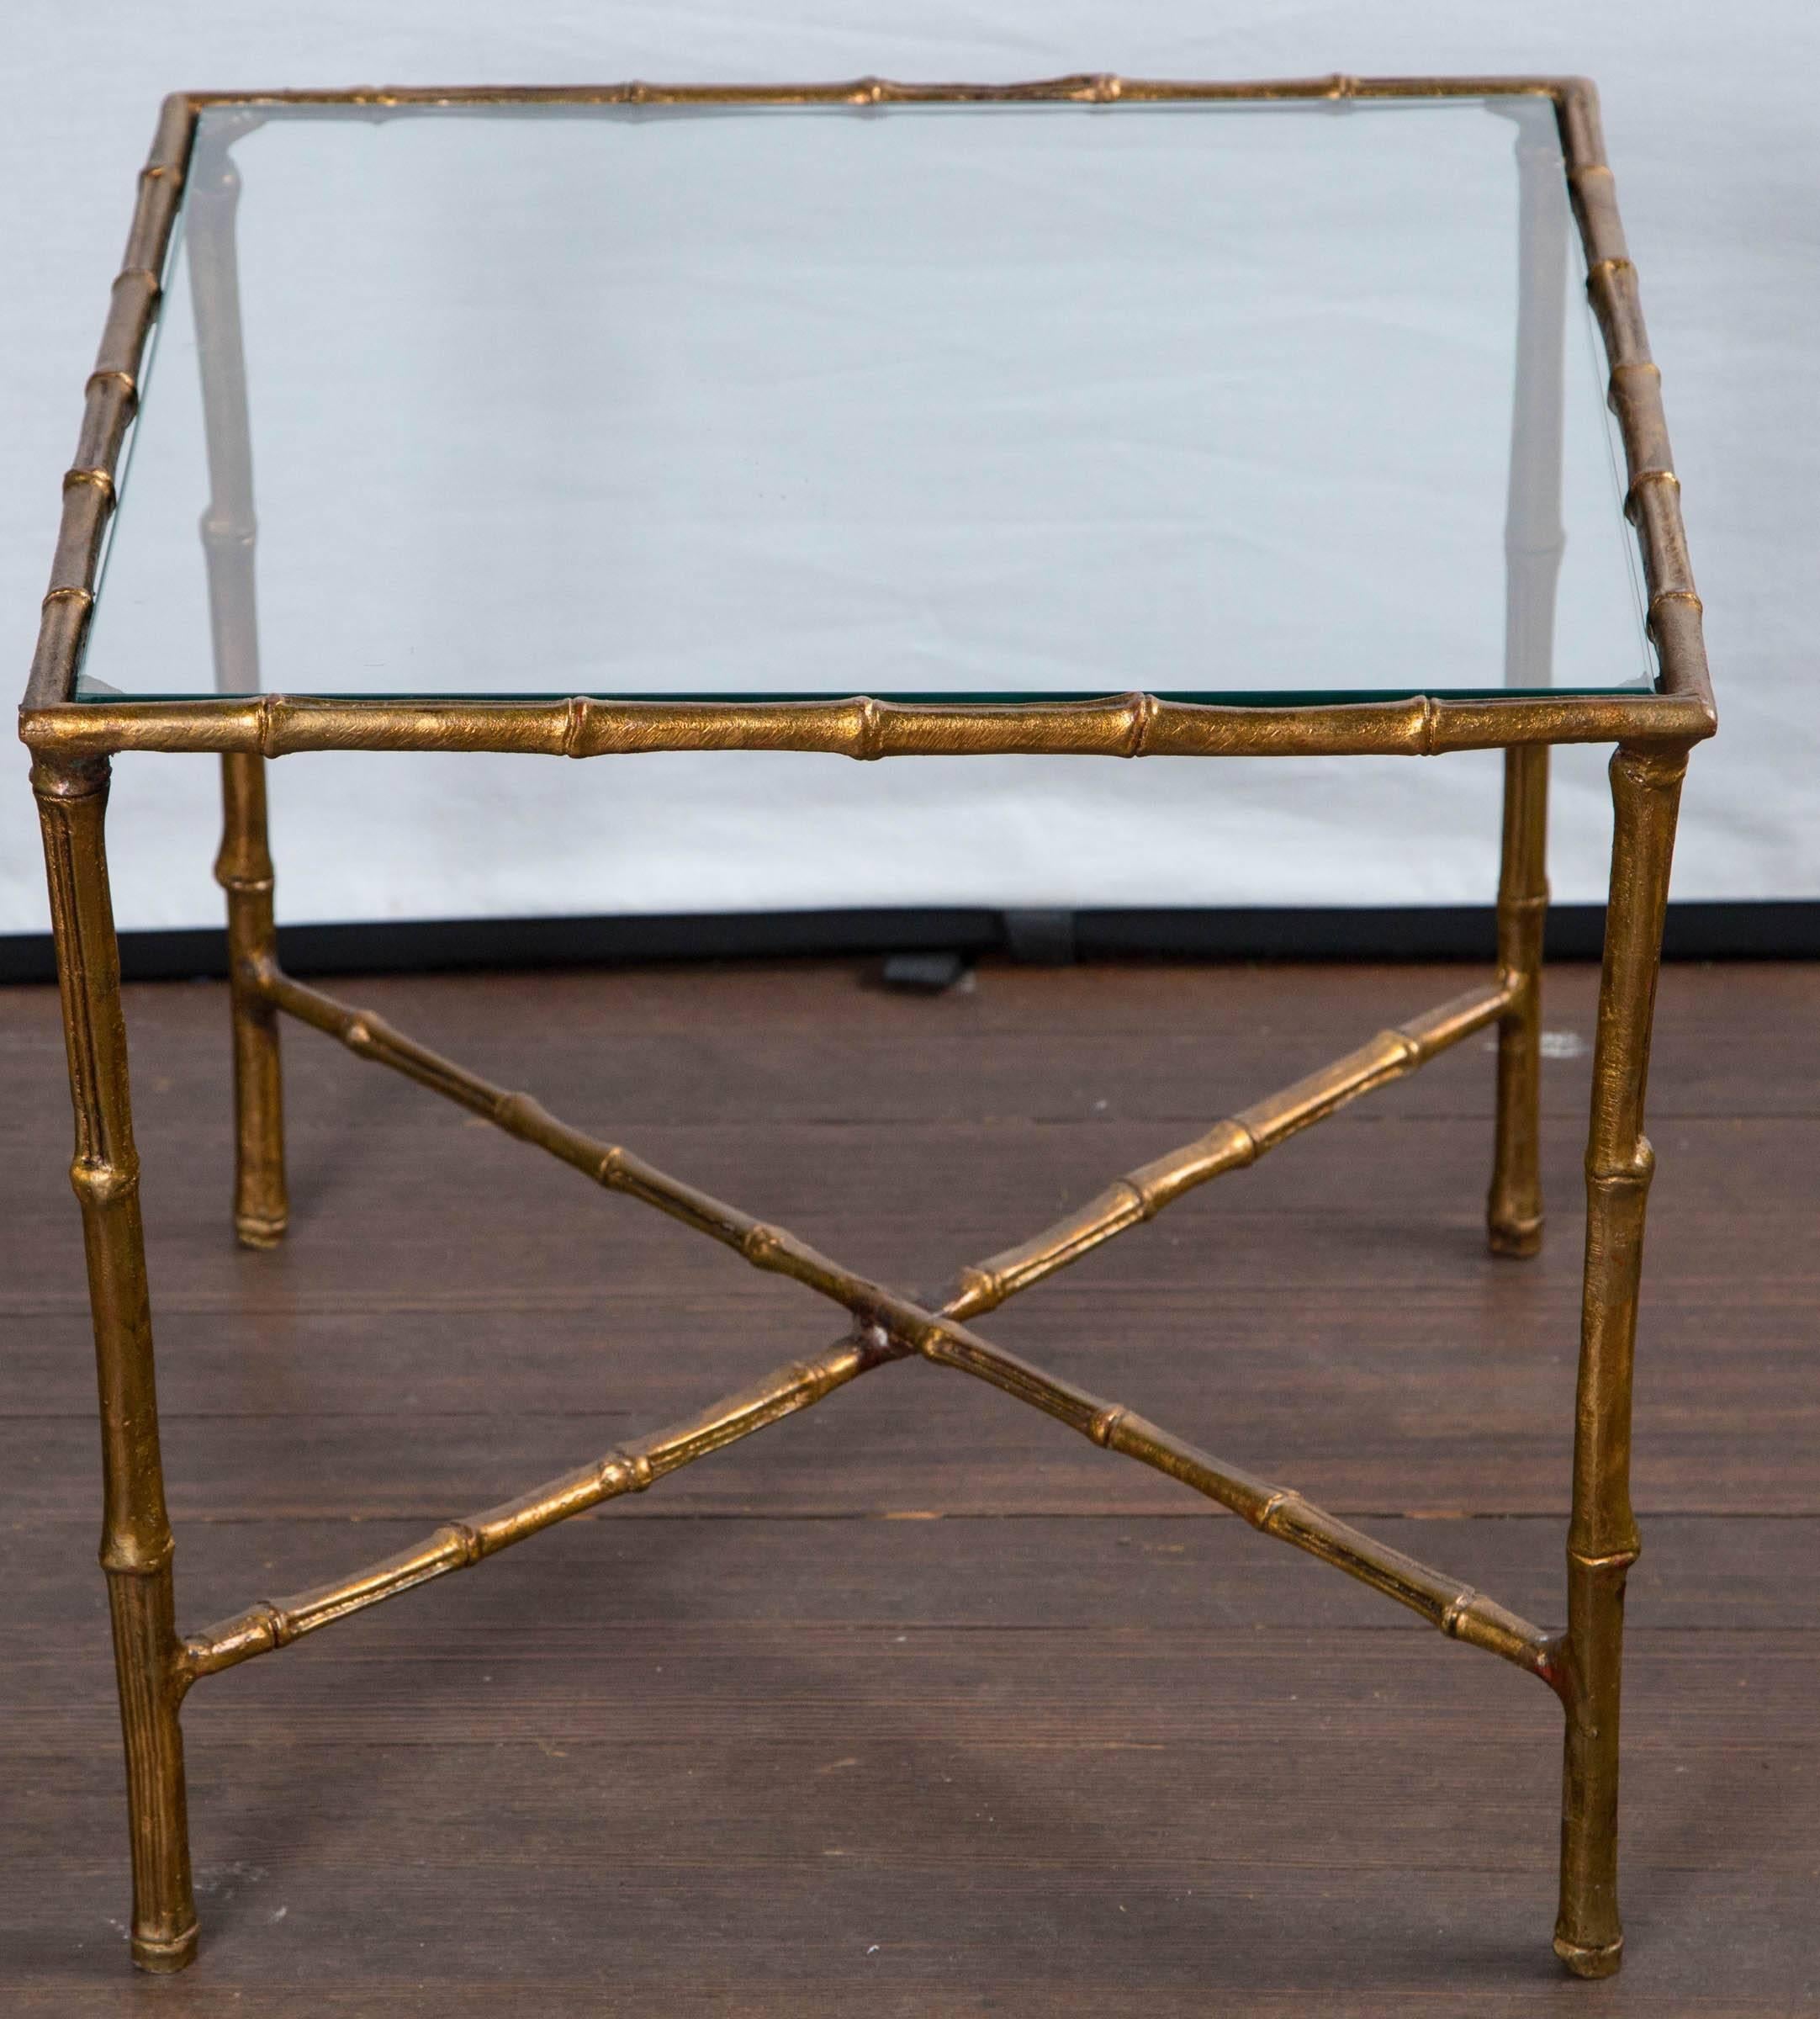 Vintage gilt metal. most likely brass, square faux bamboo tables with glass tops.
Nice weight